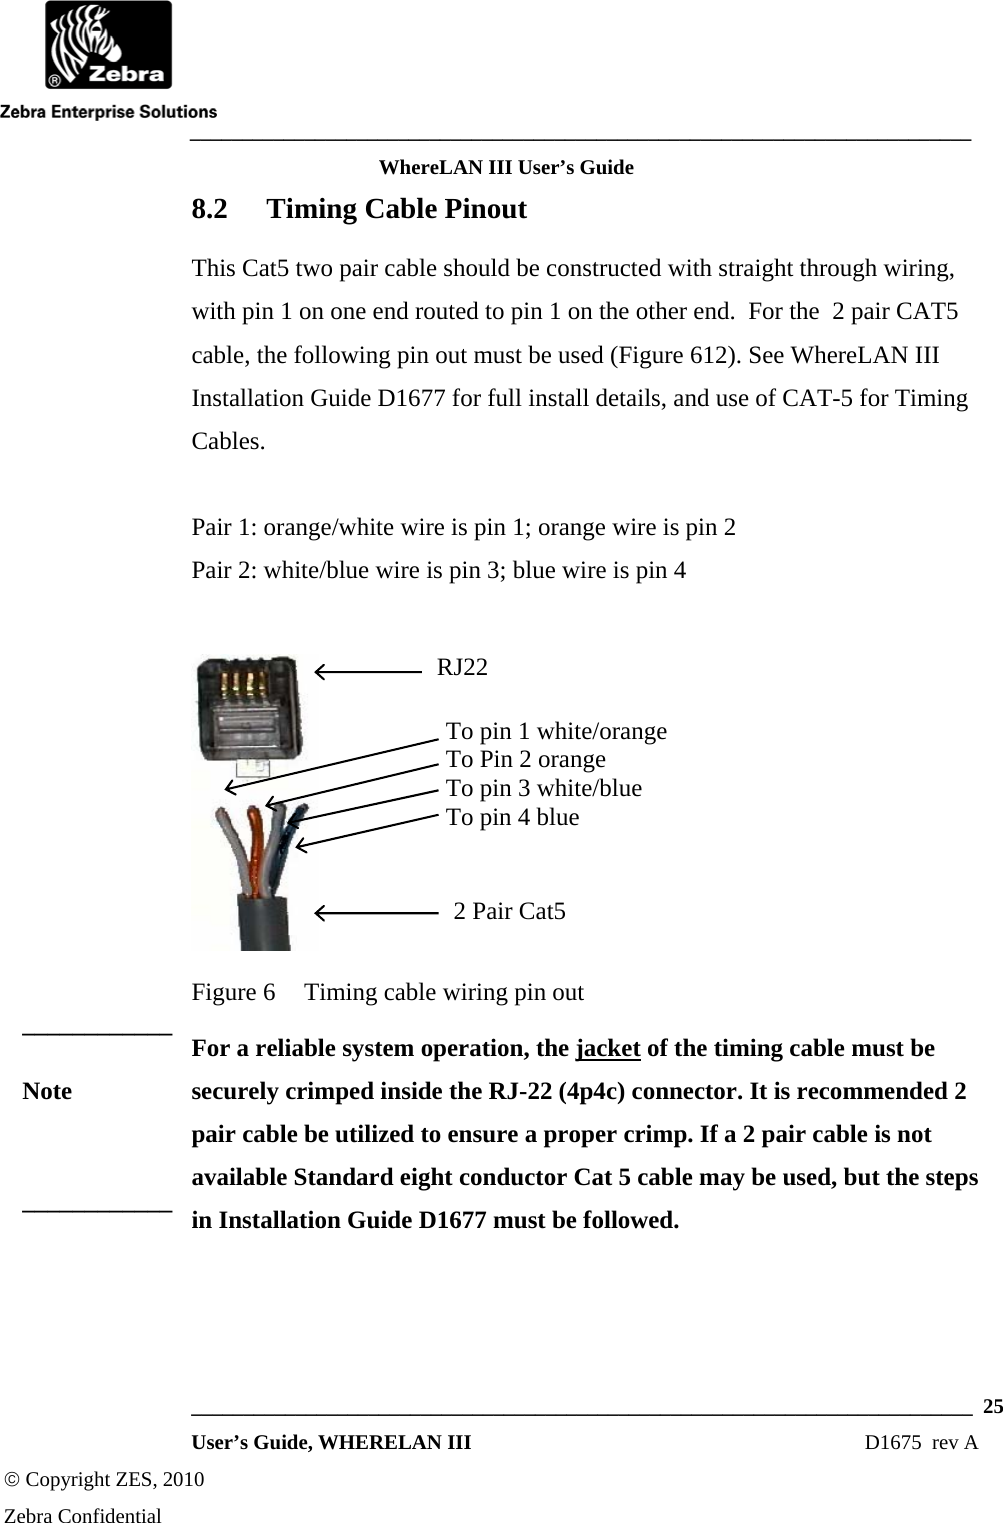    ___________________________________________________________________________ WhereLAN III User’s Guide  ___________________________________________________________________________  25  User’s Guide, WHERELAN III  D1675  rev A © Copyright ZES, 2010 Zebra Confidential 8.2 Timing Cable Pinout This Cat5 two pair cable should be constructed with straight through wiring, with pin 1 on one end routed to pin 1 on the other end.  For the  2 pair CAT5 cable, the following pin out must be used (Figure 612). See WhereLAN III Installation Guide D1677 for full install details, and use of CAT-5 for Timing Cables.  Pair 1: orange/white wire is pin 1; orange wire is pin 2 Pair 2: white/blue wire is pin 3; blue wire is pin 4   Figure 6  Timing cable wiring pin out For a reliable system operation, the jacket of the timing cable must be securely crimped inside the RJ-22 (4p4c) connector. It is recommended 2 pair cable be utilized to ensure a proper crimp. If a 2 pair cable is not available Standard eight conductor Cat 5 cable may be used, but the steps in Installation Guide D1677 must be followed.    RJ22 2 Pair Cat5 To pin 1 white/orange To Pin 2 orange To pin 3 white/blue To pin 4 blue ____________ Note ____________ 